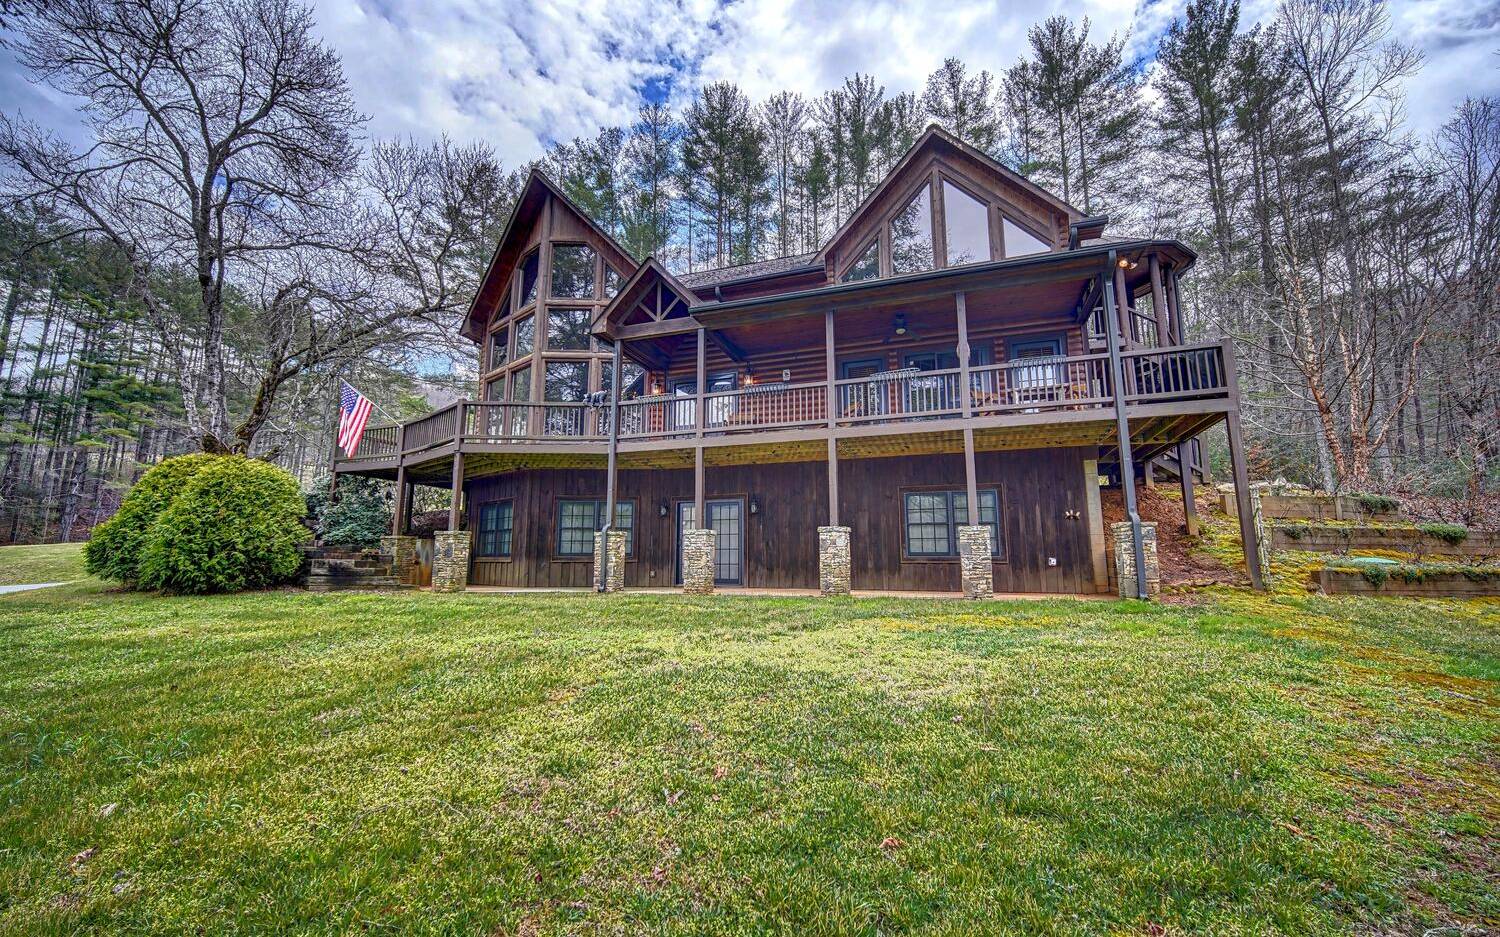 PRICE DROP!! Rustic Lodge Style Home w/ Views & Private Pond!! This 3br/2.5ba spacious home sits on 1.16ac just East of downtown Hiawassee. Open floor plan w/ prow front windows gives light the to the beautiful mountain views!! Custom kitchen w/ large island, granite counters, copper backsplash, walkin pantry, & plenty of cabinet space! Living room features gas log FP w/ stone up to T&G wood cathedral ceiling. Master BR on main floor opens to covered porch. Master BA w/ jetted tub has impressive stone work, double vanity, makeup counter, walkin shower & 2 walkin closets. Upper level features 2 roomy bedrooms, full BA, & loft area w/ custom wet bar. Unfinished BSMT is stubbed for 3rd BA & can be finished out w/ endless possibilities! Detached 2 car garage. Private pond. Wrap around deck. Side spiral staircase. Terraced gardens. Near local winery & Appalachian Trail! SHORT TERM RENTALS NOT ALLOWED.